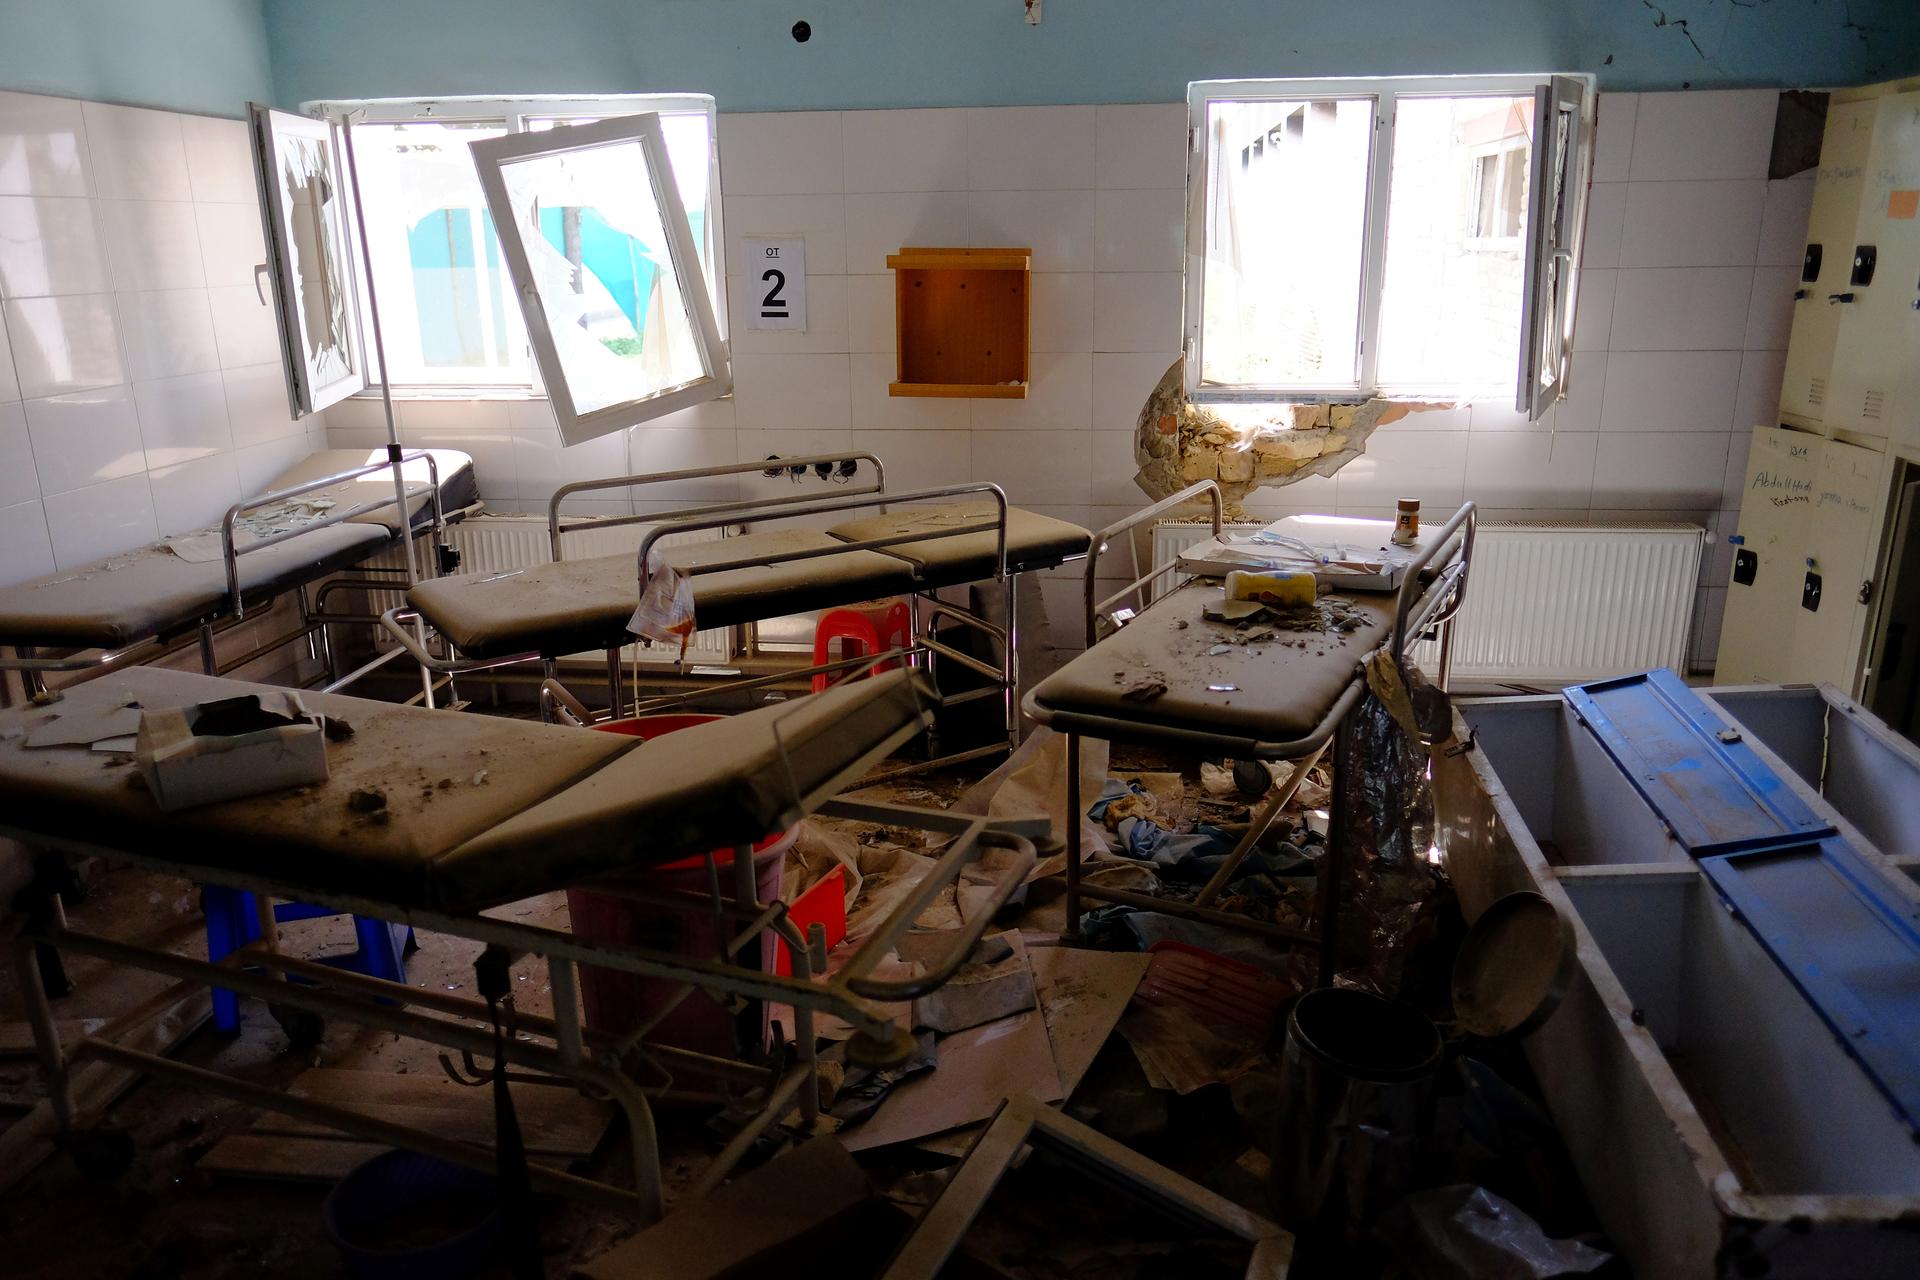 Hospital beds lay in the Medecins Sans Frontieres hospital in Kunduz, Afghanistan on April 26, 2016, about six months after an American airstrike killed dozens of patients, some of whom burned to death in their beds.